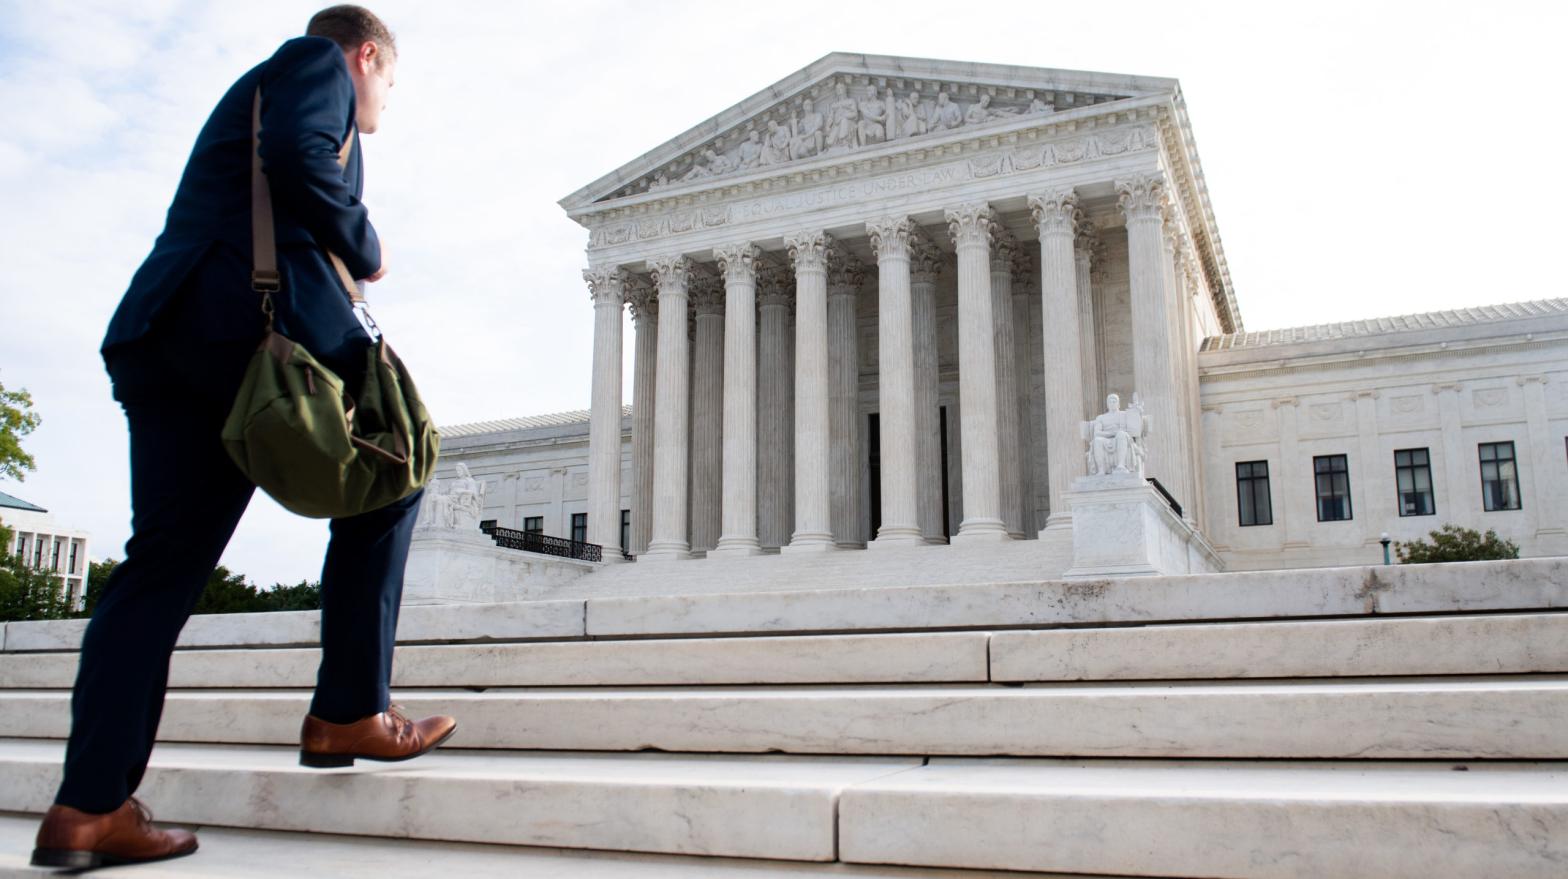 A man walks up the steps on the first day of a new term at the US Supreme Court in Washington, DC, October 7, 2019 (Photo: SAUL LOEB / AFP, Getty Images)